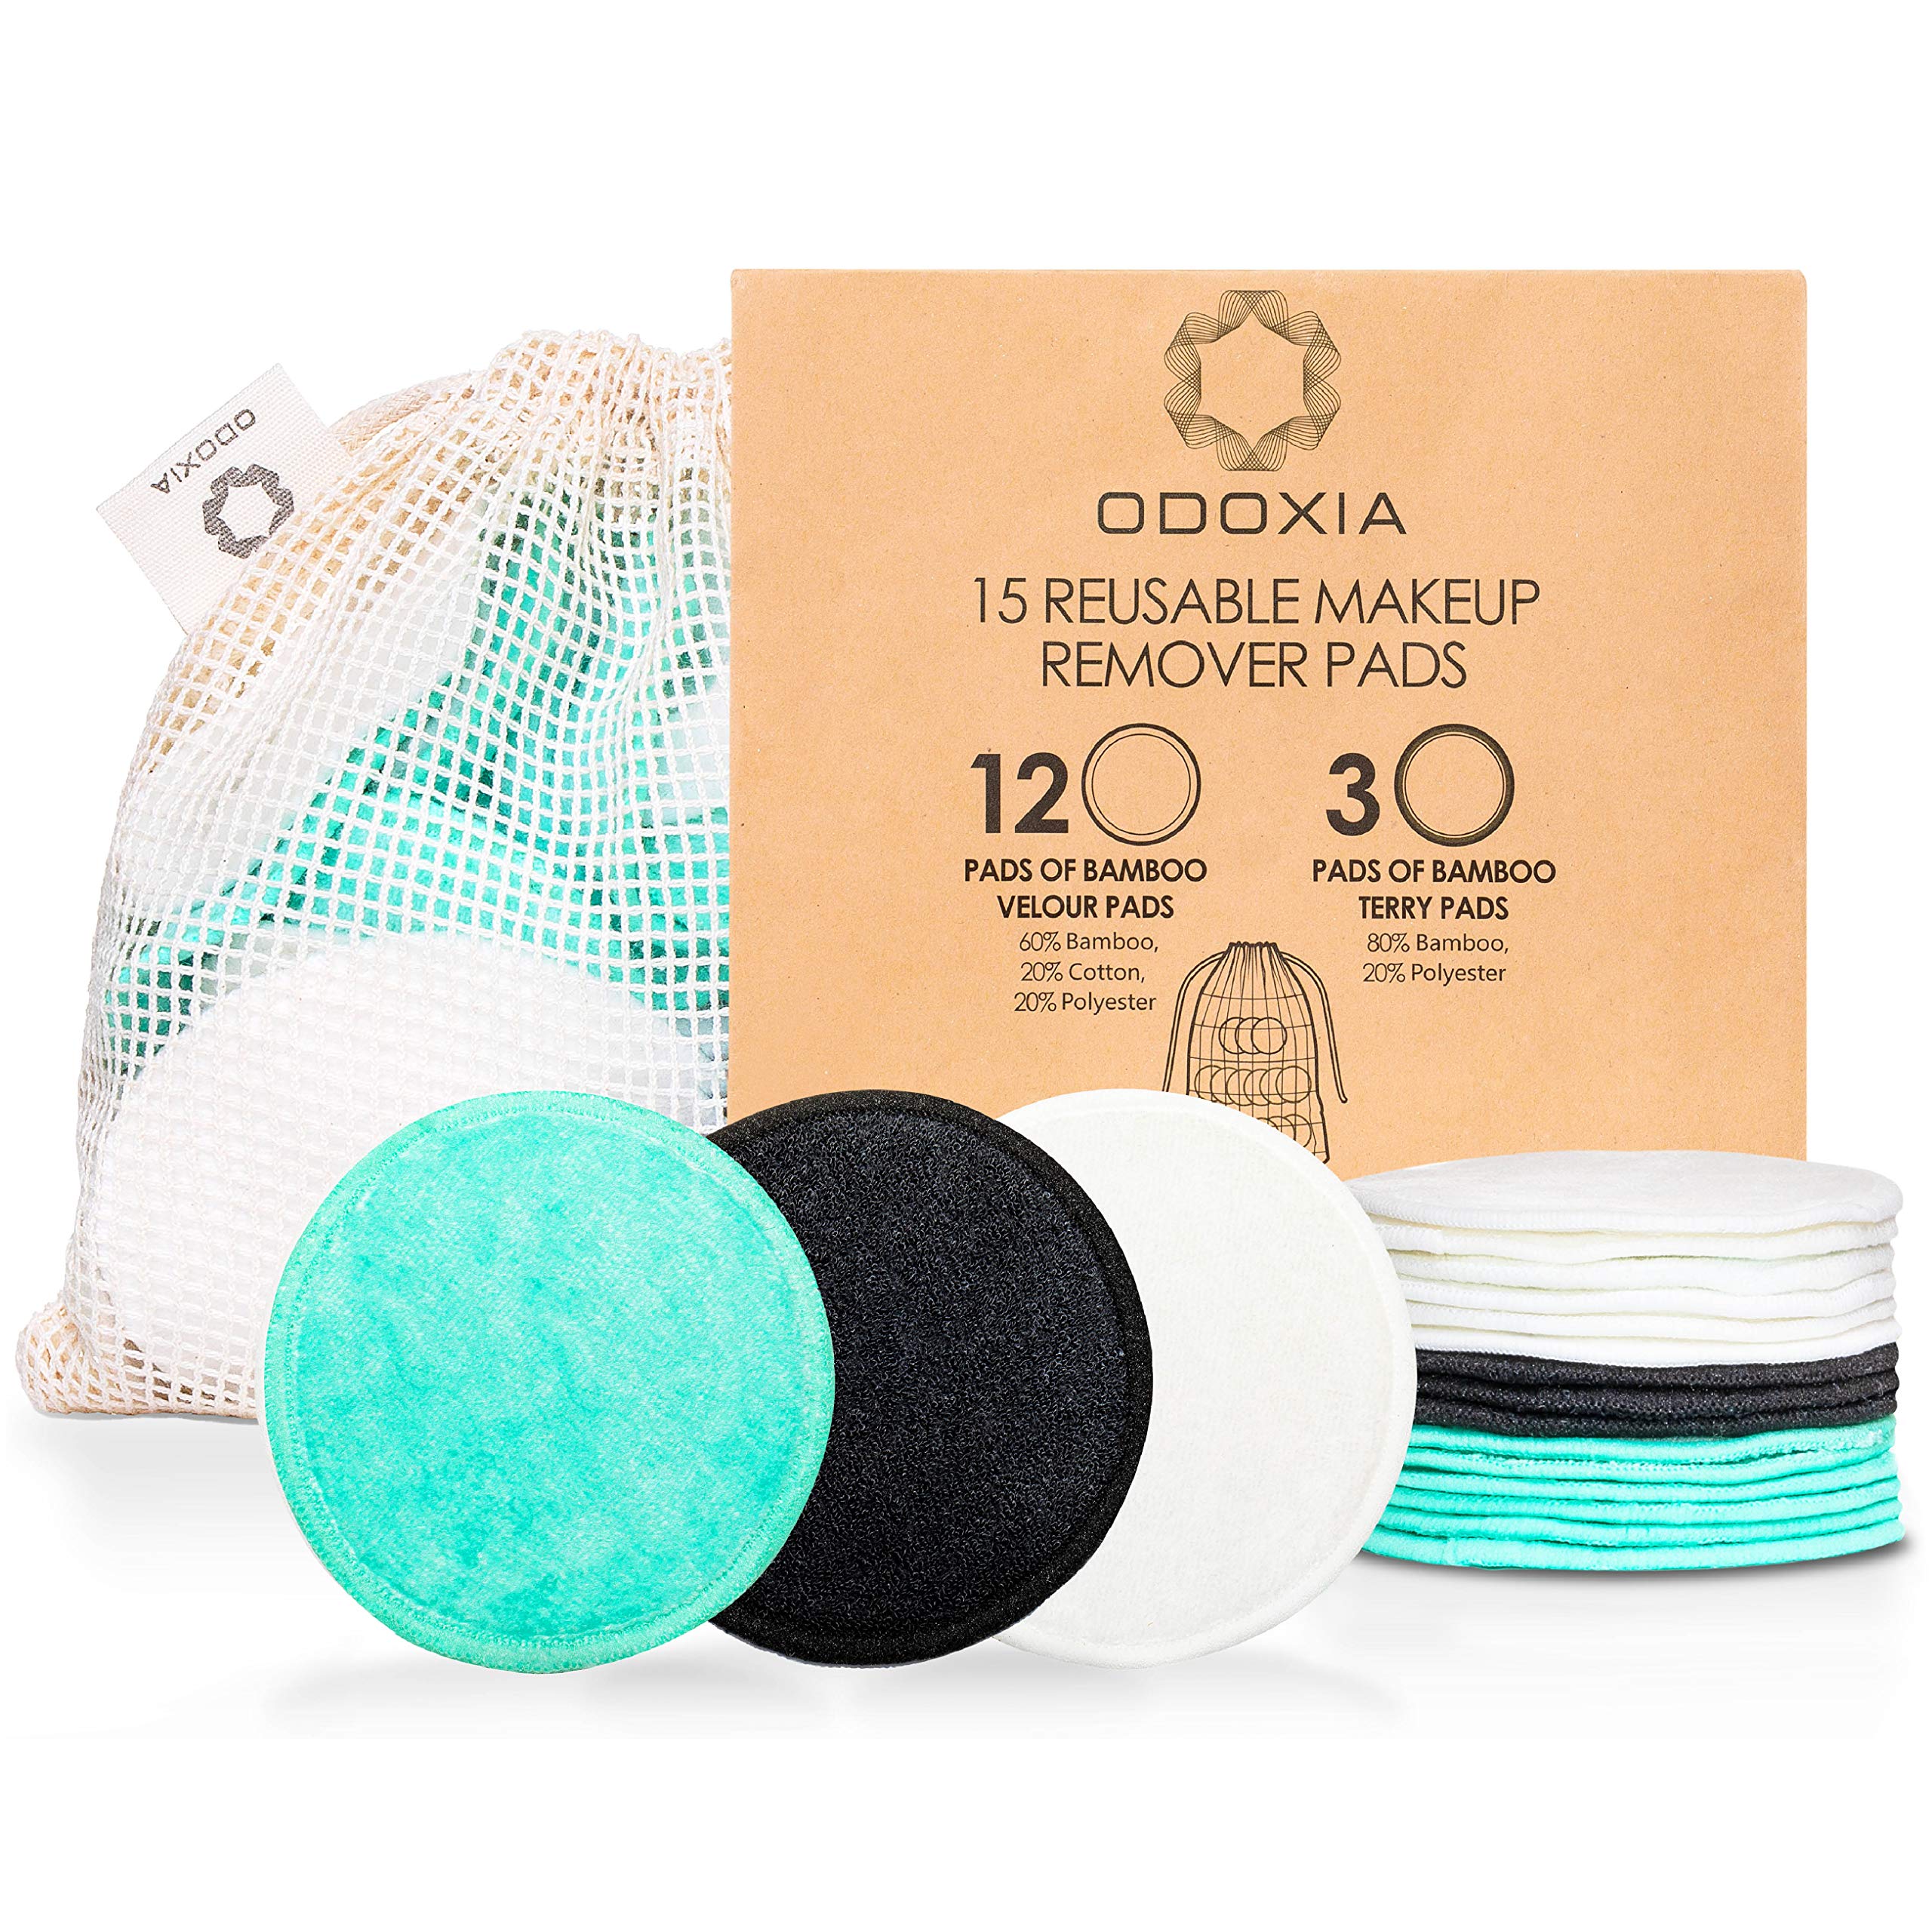 Reusable Makeup Remover Pads | Eco Friendly & Zero Waste Cotton Rounds | Beauty Products | 15 Natural & Organic Face Pads with Laundry Bag | Soft for All Skin Types | Bamboo Wipes for Facial Cleansing